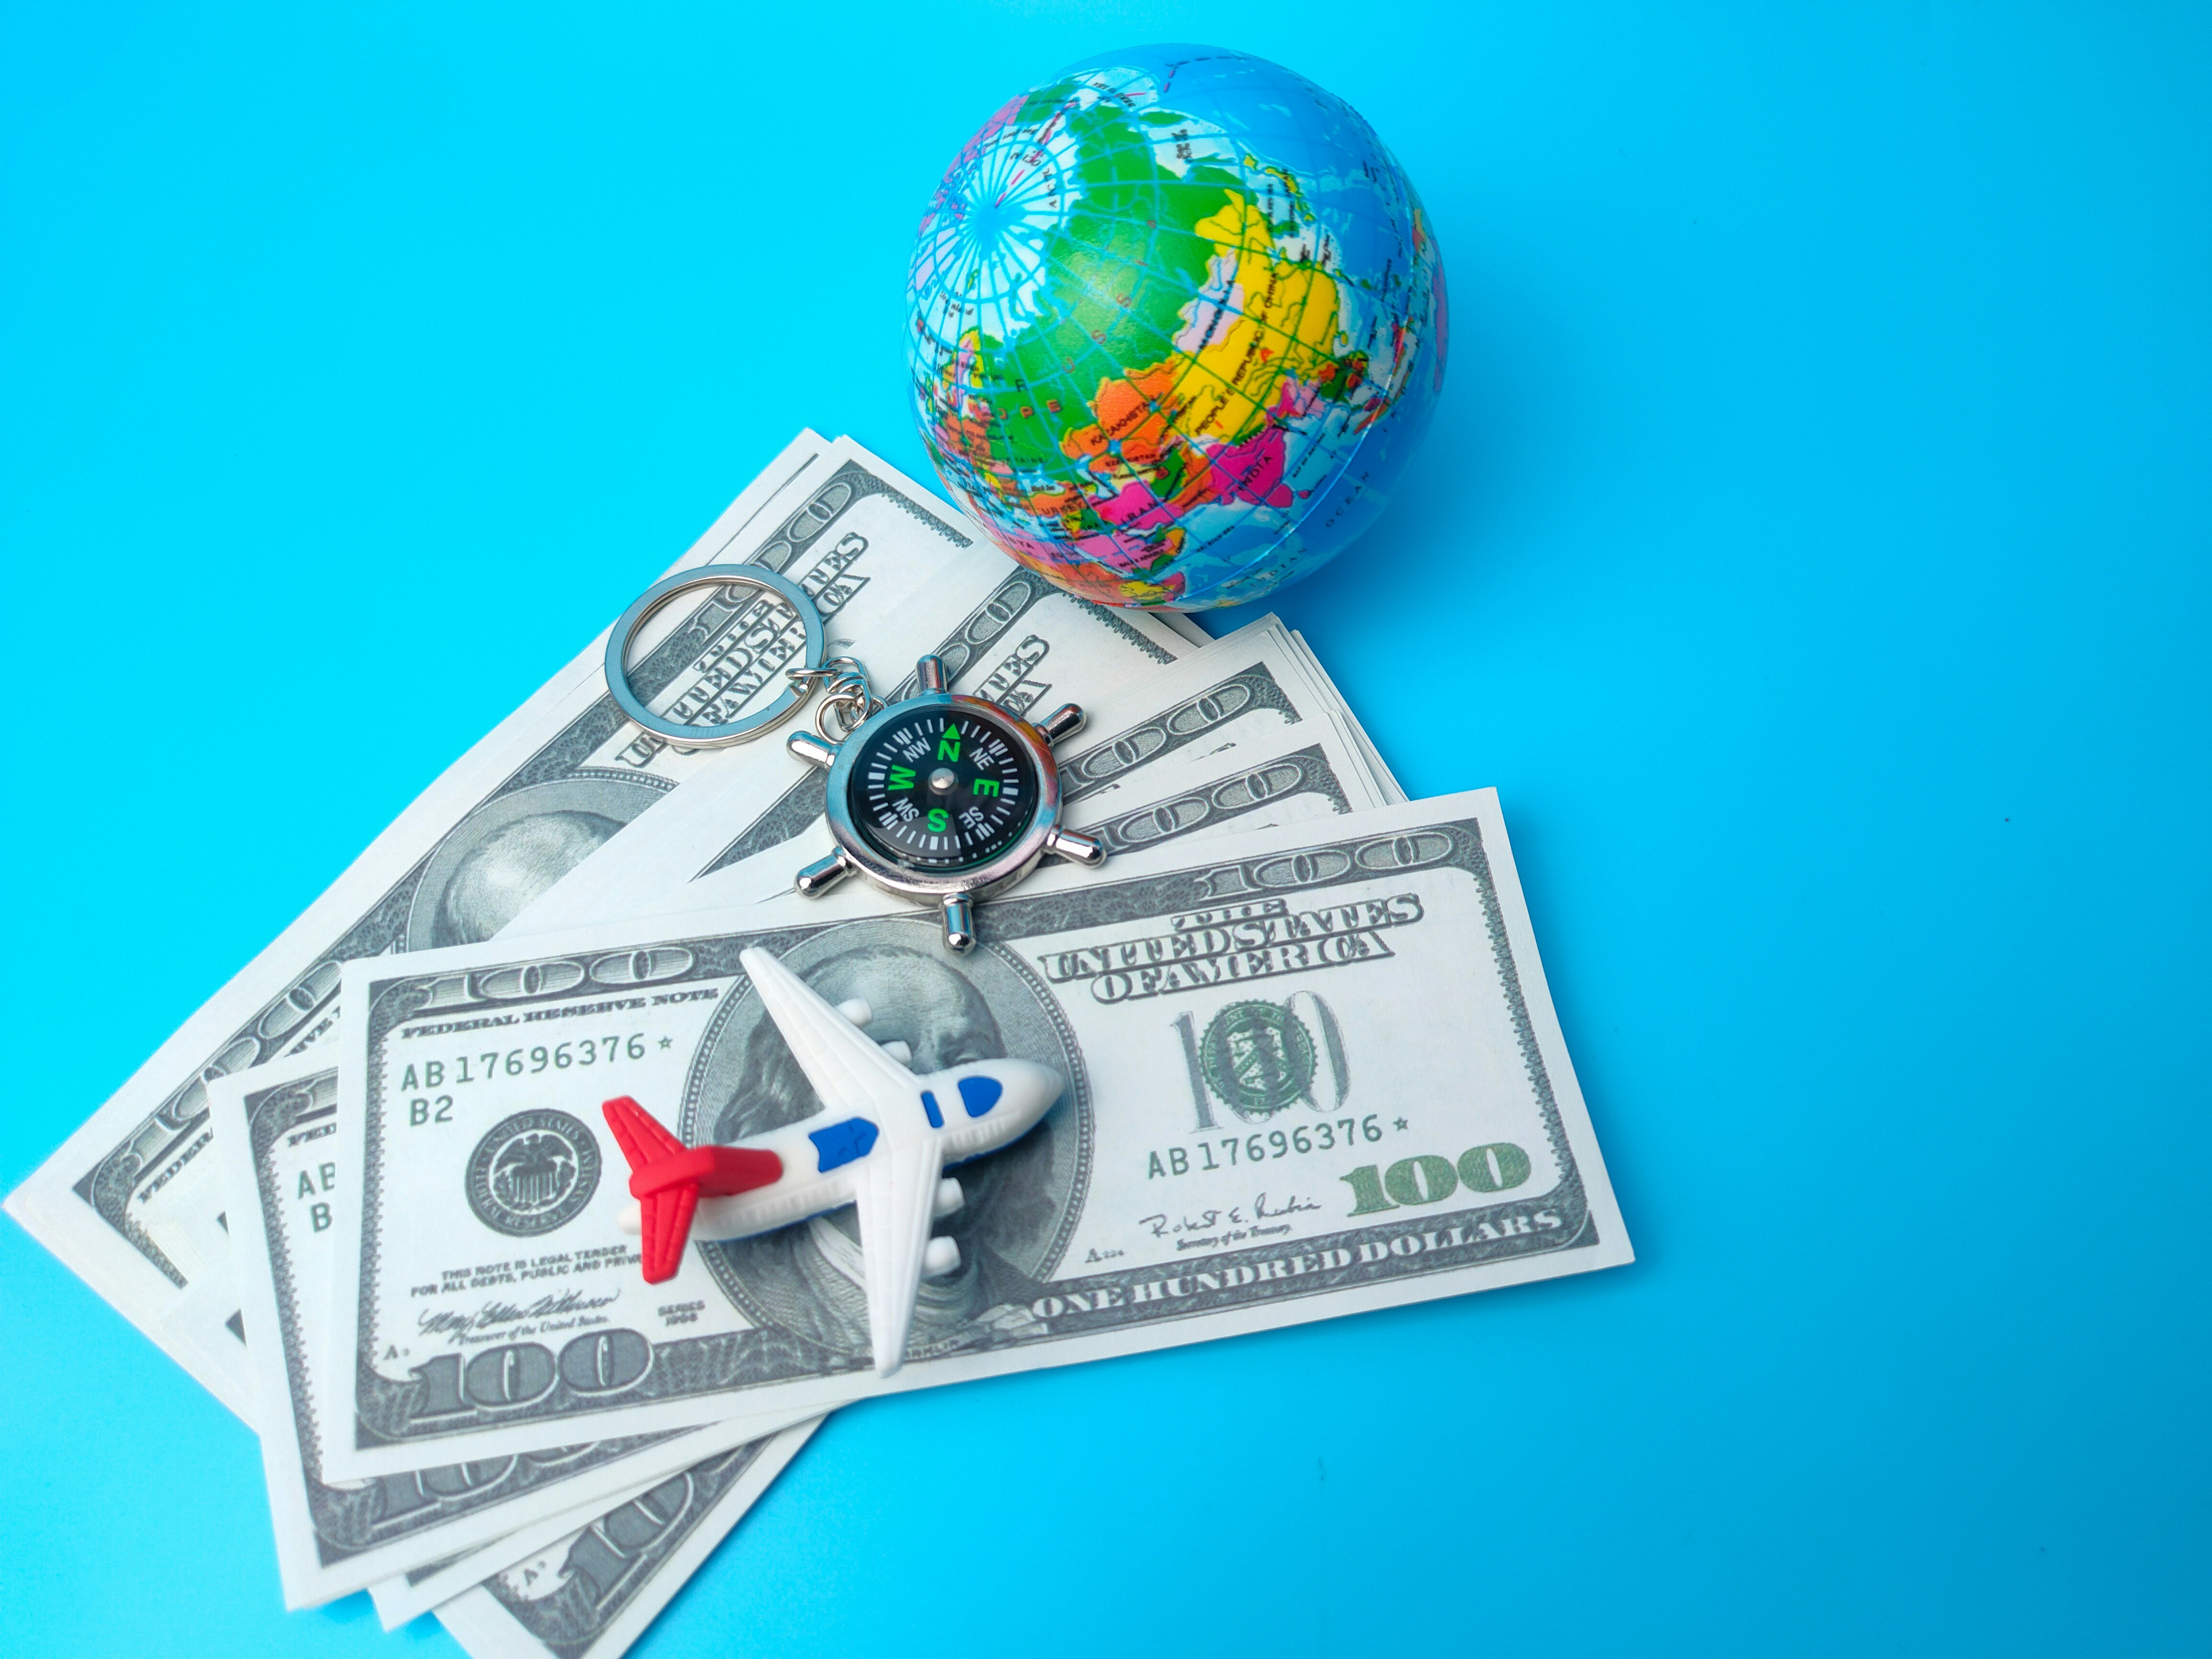 Compass,banknotes, earth globe and airplane on blue background.